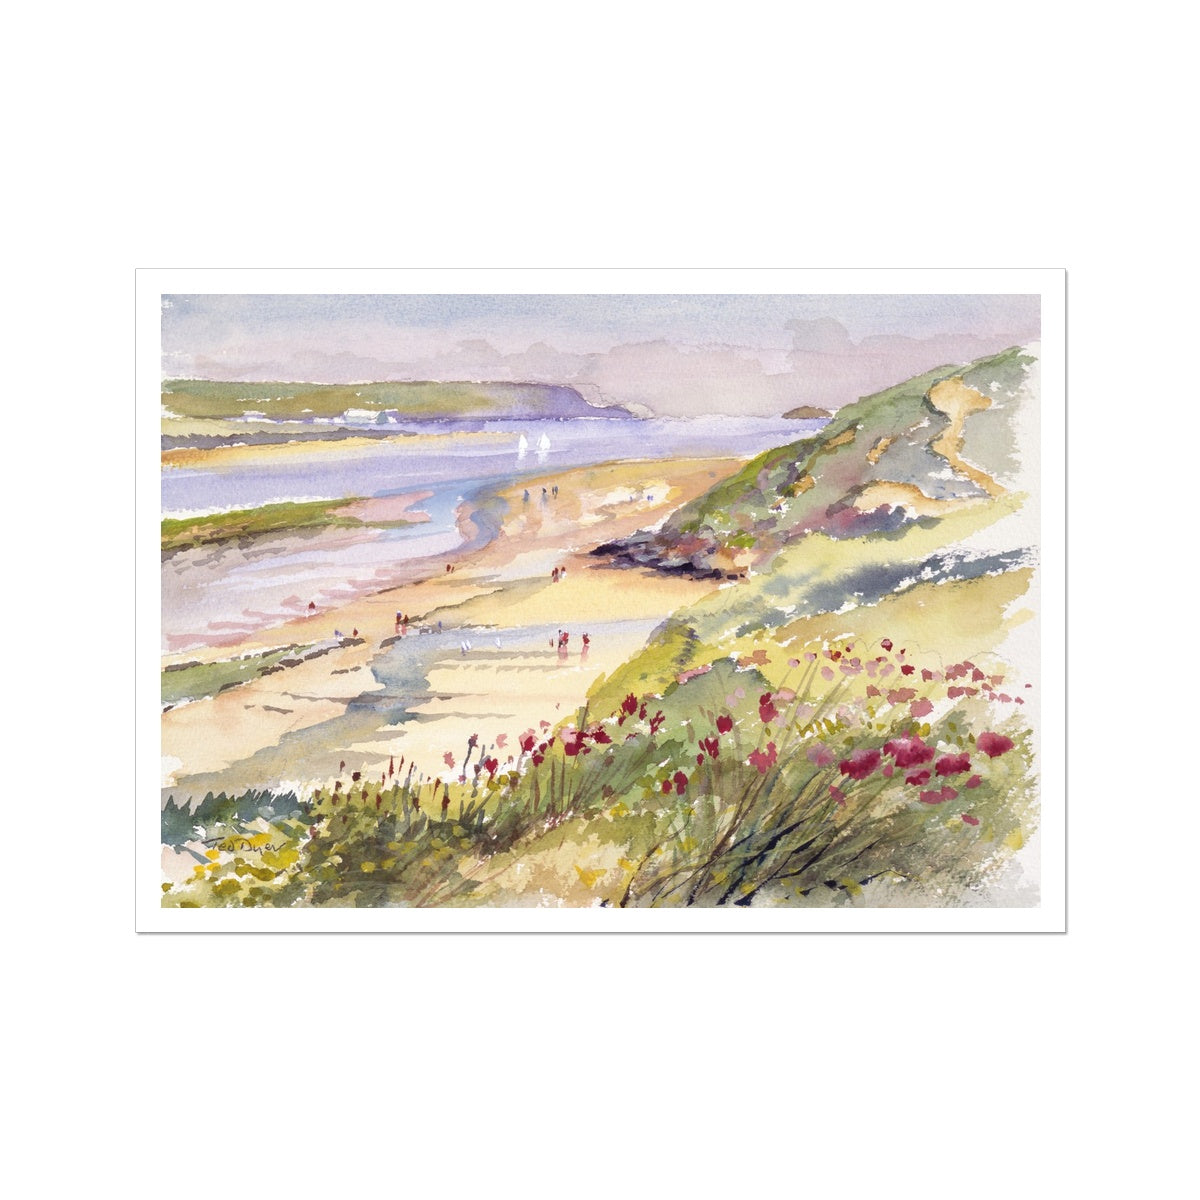 Ted Dyer Fine Art Print. Open Edition Cornish Art Print. 'View of the Camel Estuary and Daymer Bay from Rock'. Cornwall Art Gallery